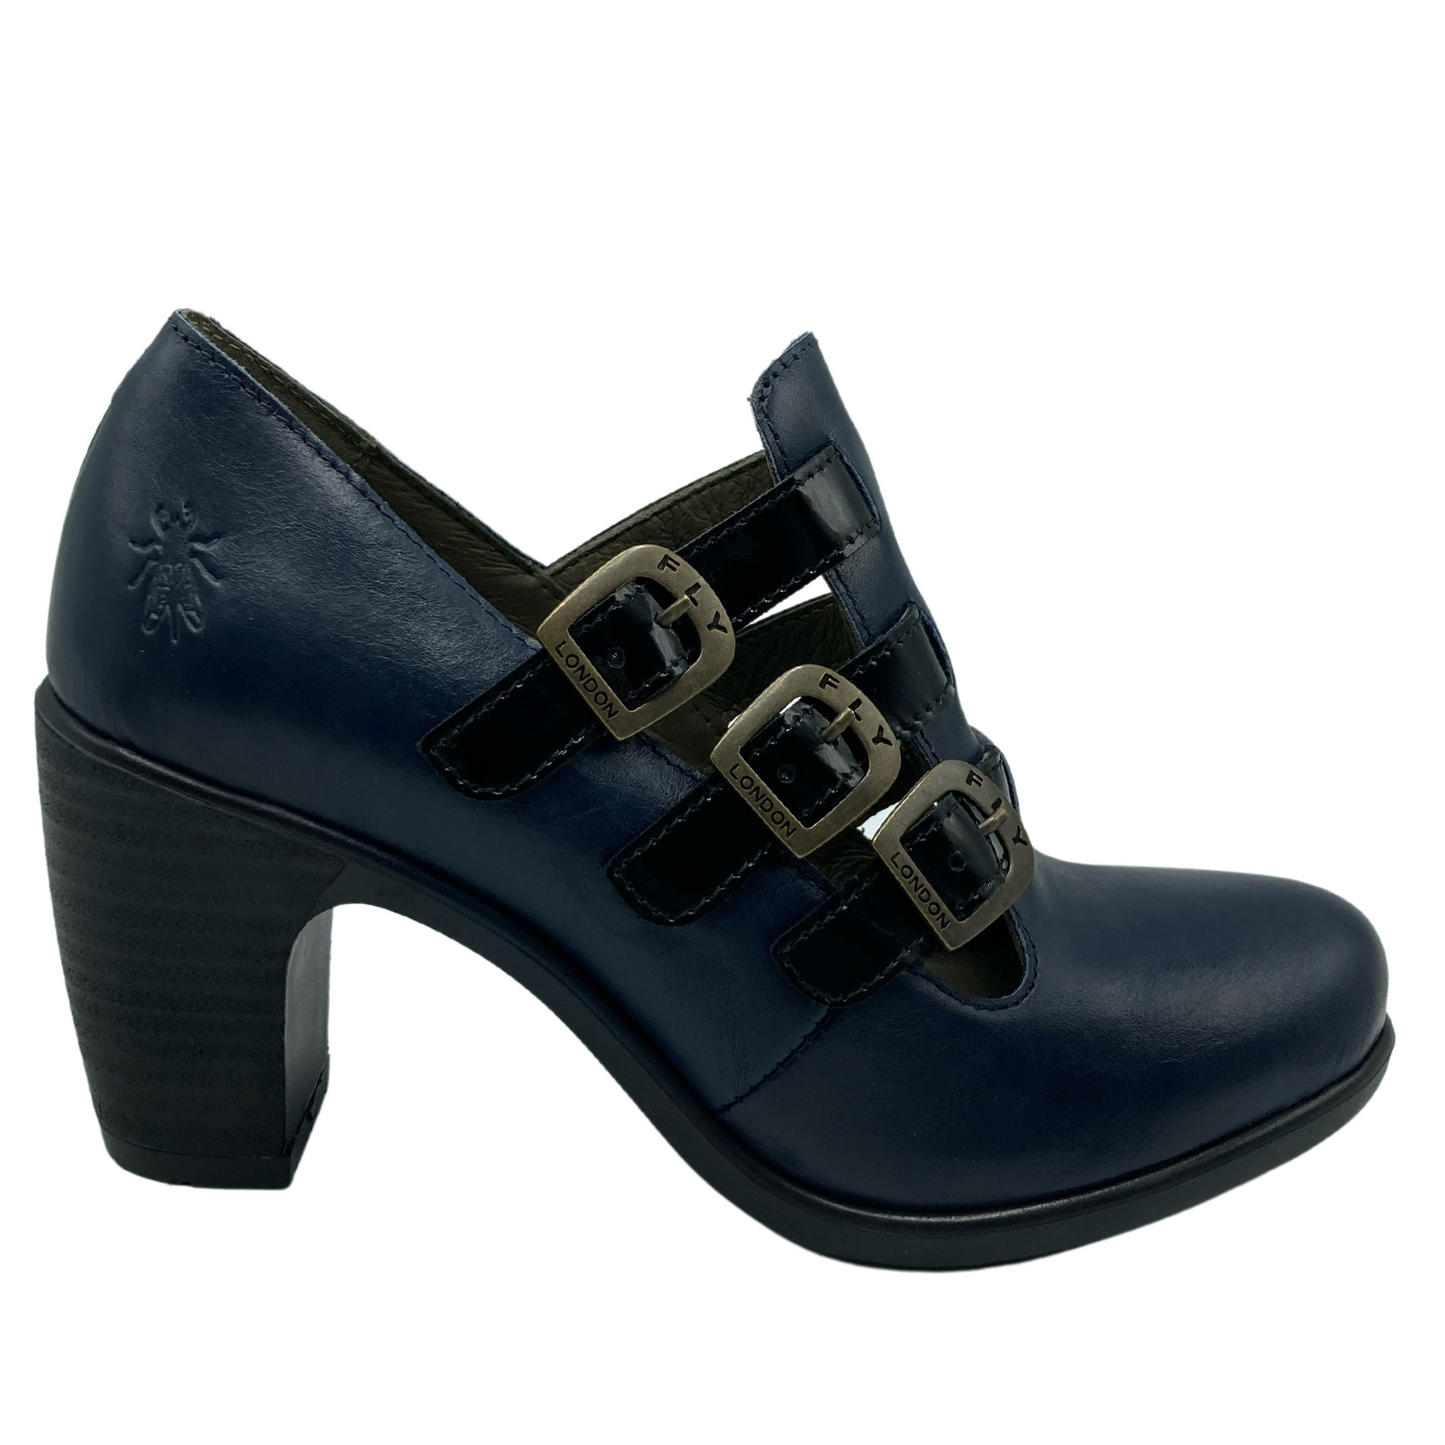 Right facing view of navy leather shoes with black 3 inch heel, 3 black straps with buckles